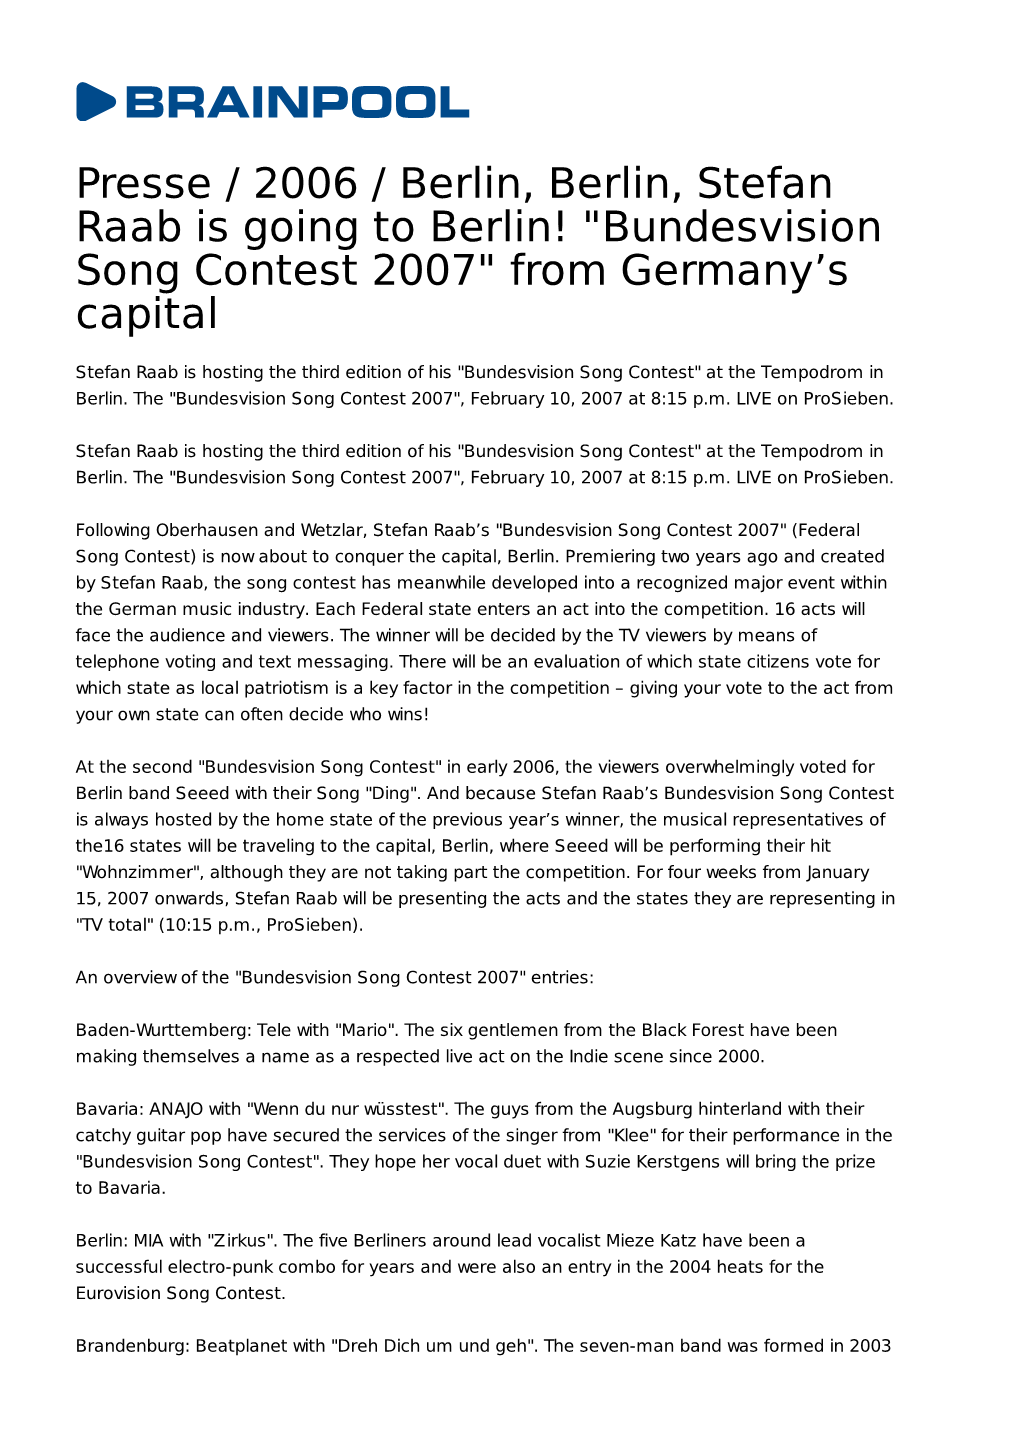 Bundesvision Song Contest 2007" from Germany’S Capital